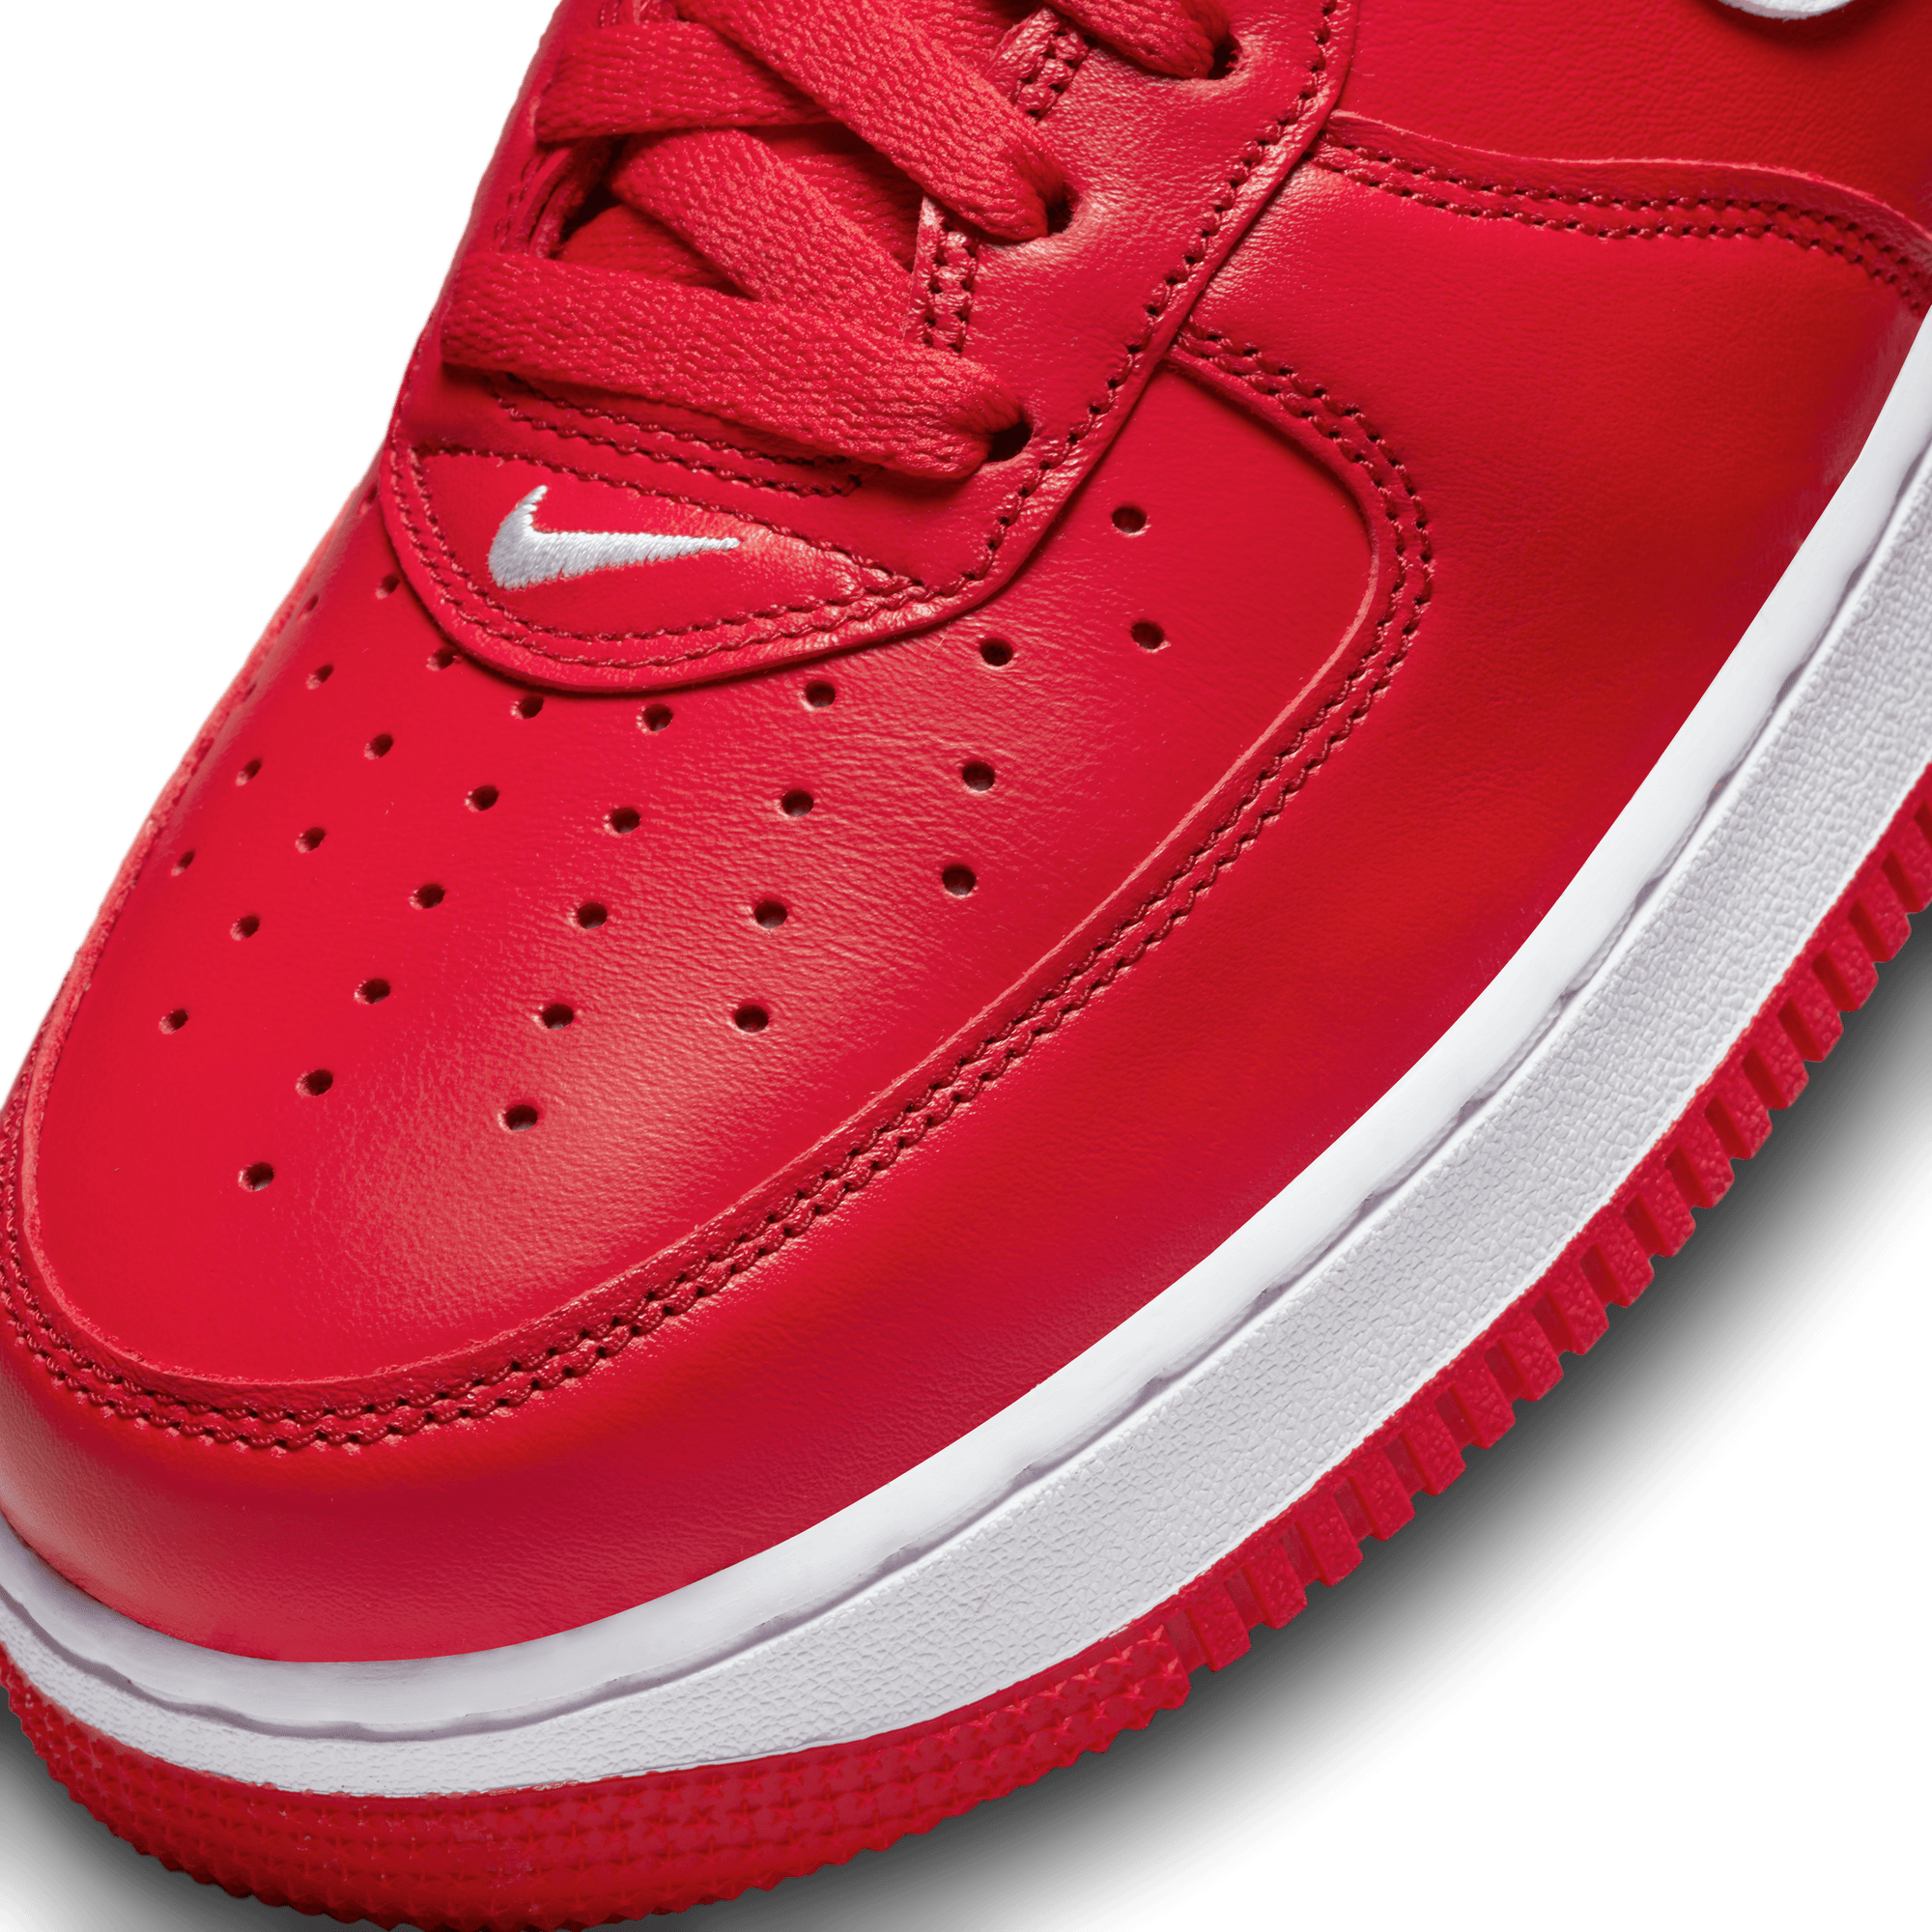 Nike Air Force 1 Low '07 Retro Color of the Month University